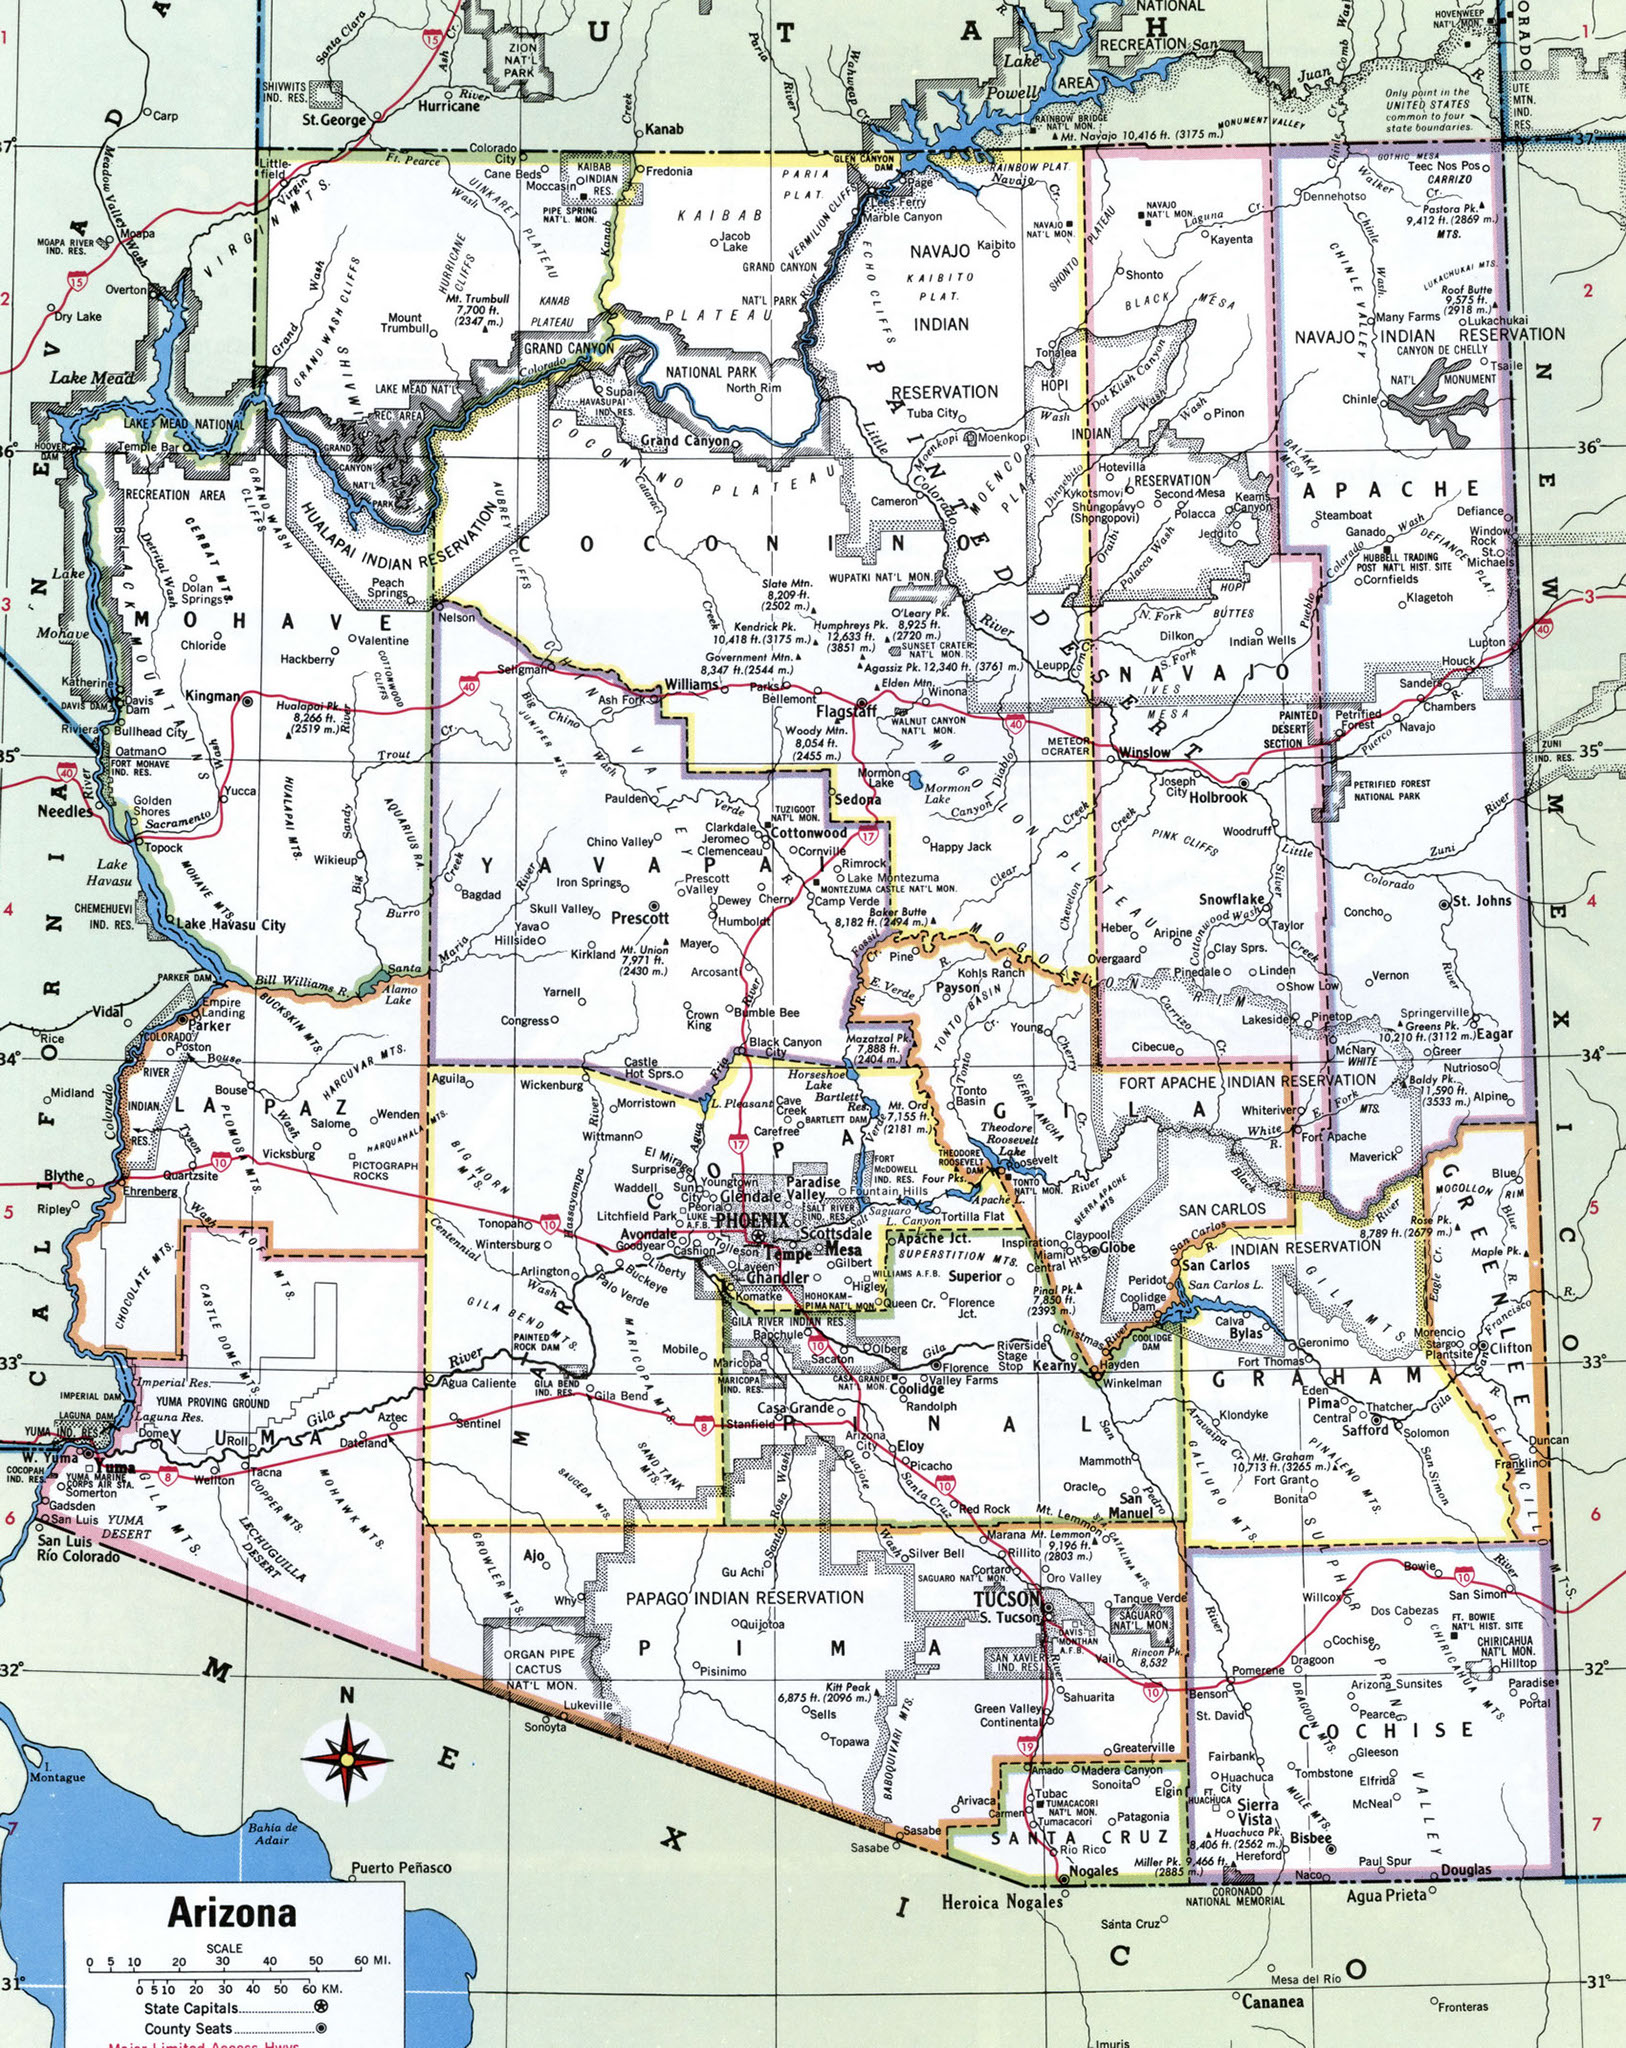 Map of Arizona by county